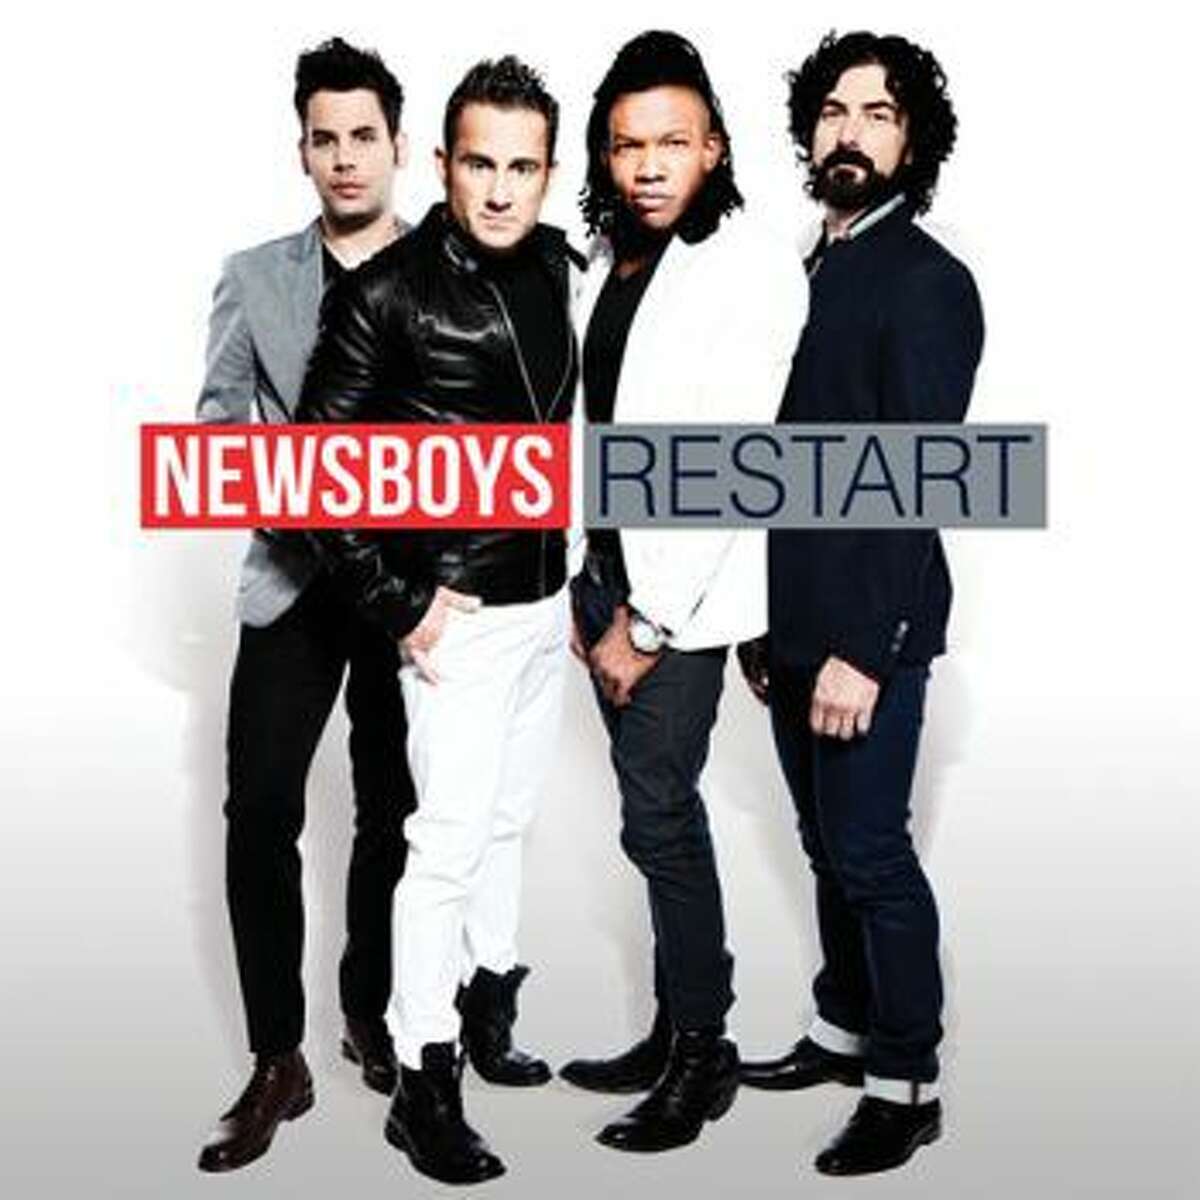 Christian contemporary artists The Newsboys have a new CD out, "Restart."